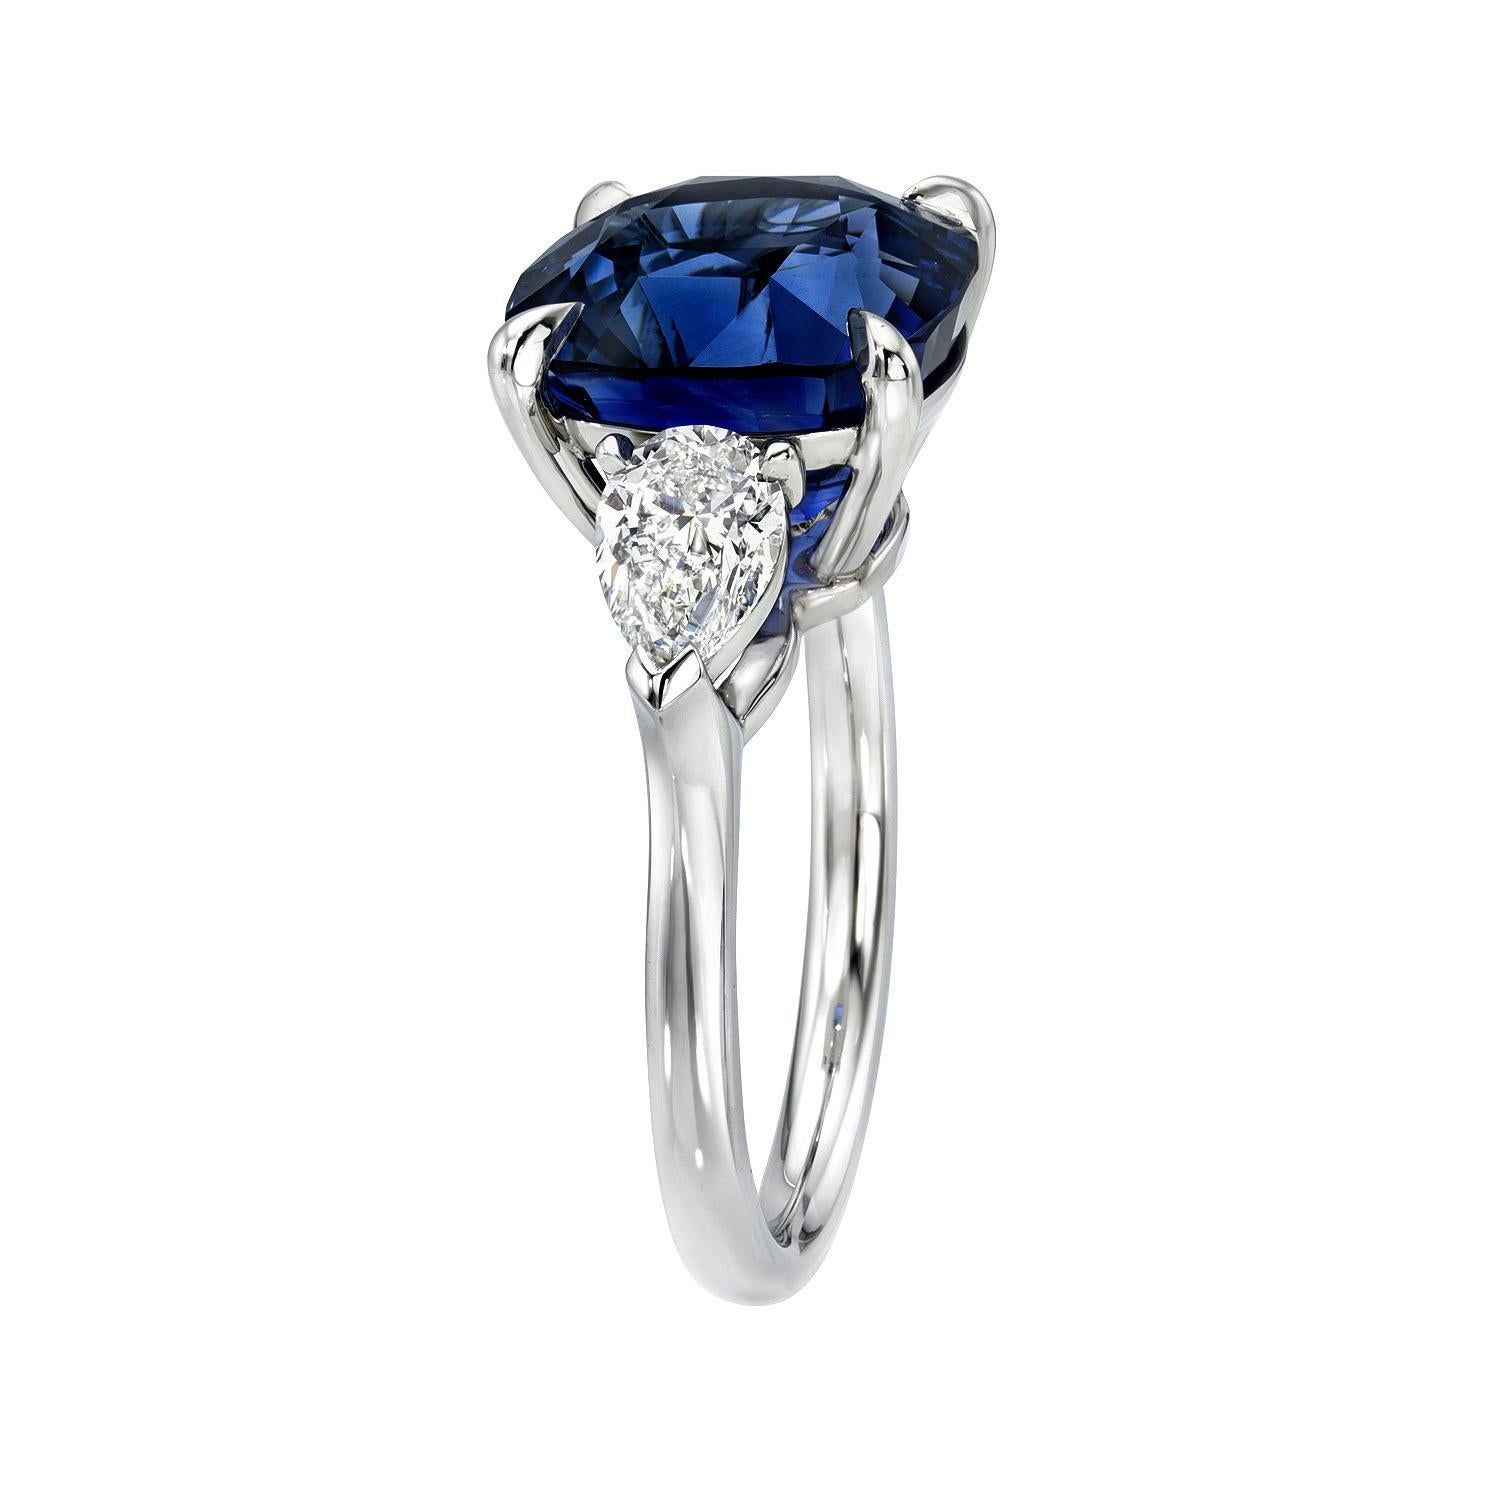 Impressive 8.02 carat Royal Blue Ceylon Sapphire cushion, three stone platinum ring, flanked by a pair of 1.00 carat, E/VS1 pear shape diamonds.
Ring size 6. Resizing is complementary upon request.
The GIA gem and diamond reports are attached to the